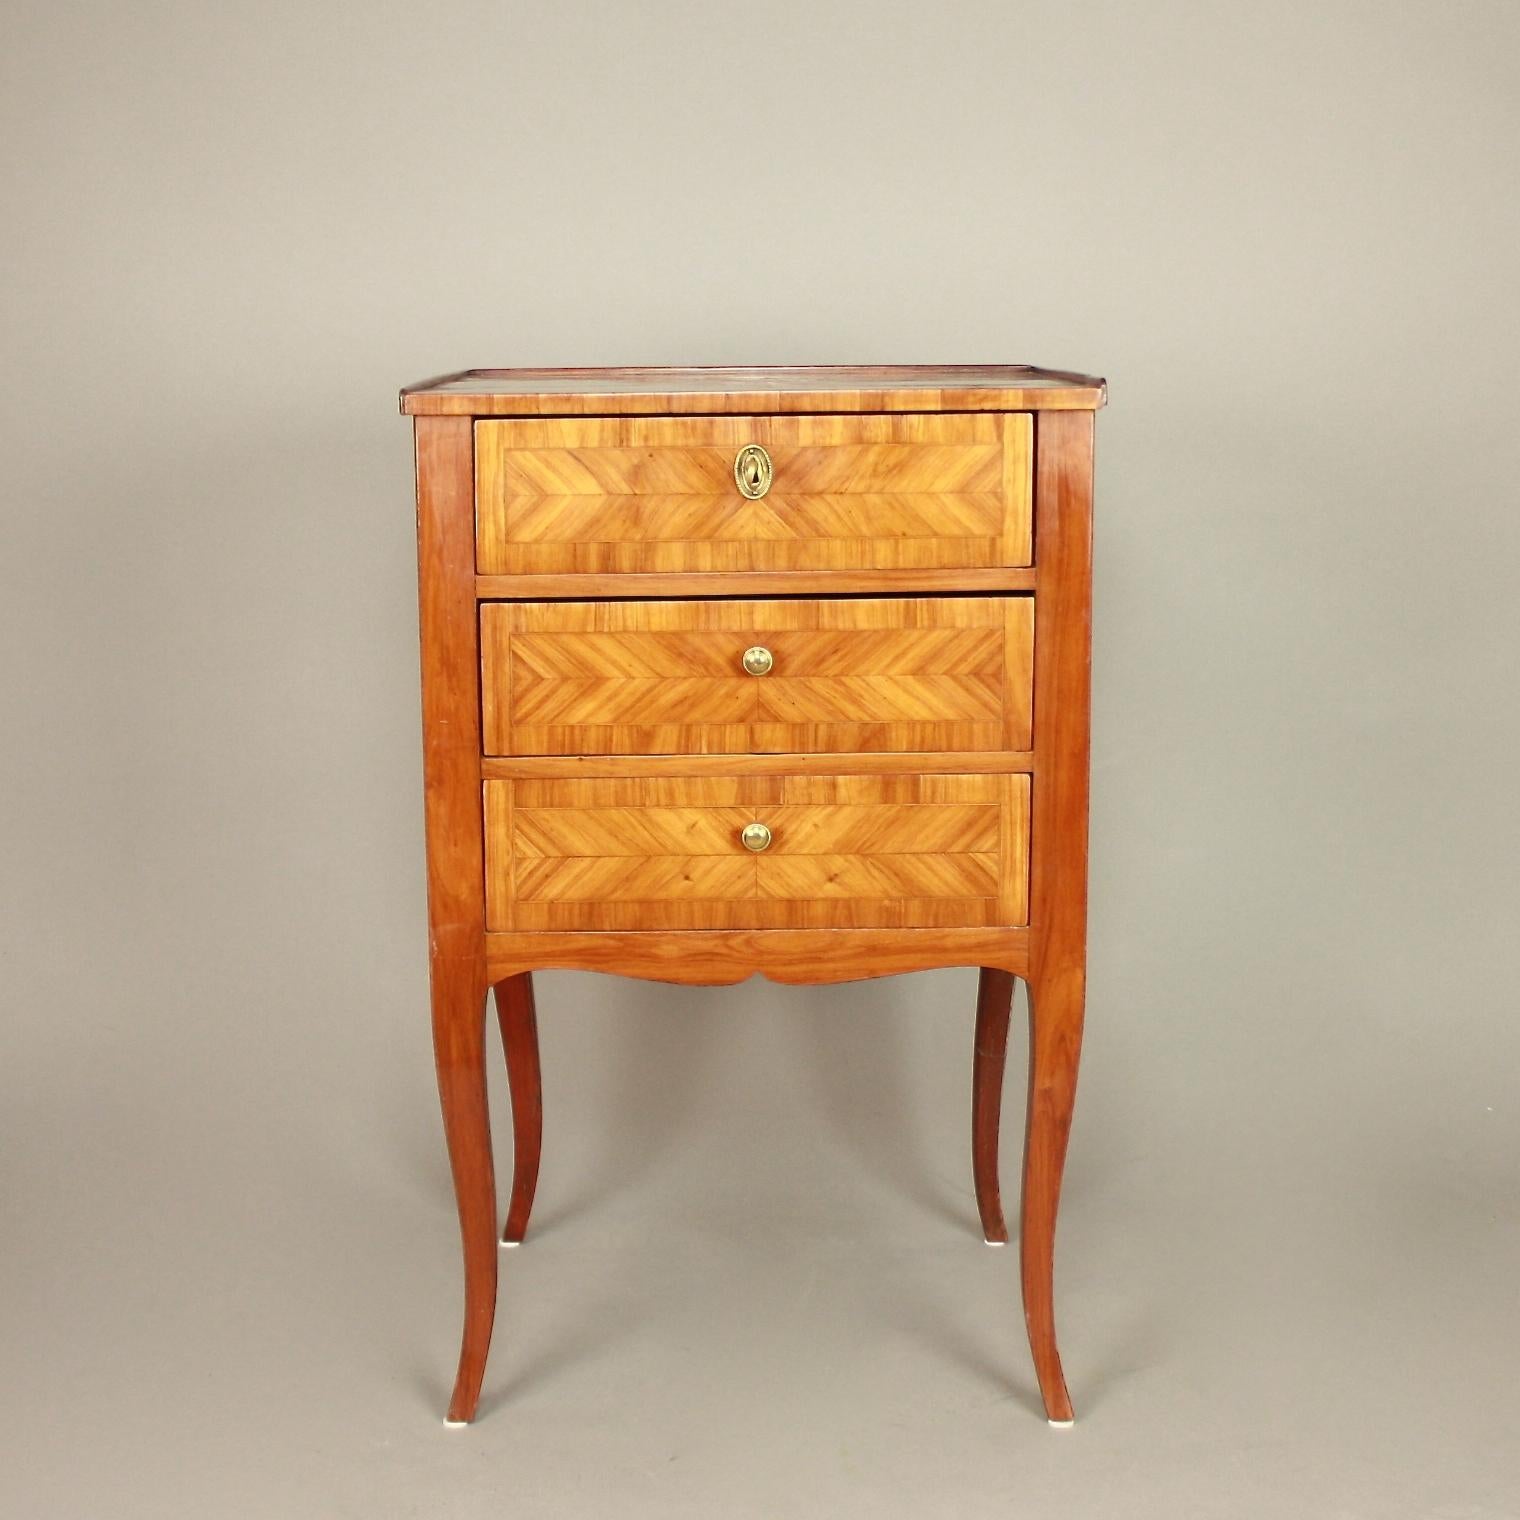 18th Century French Small Louis XV Marquetry Side Table or Table Chiffonnière

A small Louis XV transition period side table or commode, a so-called 